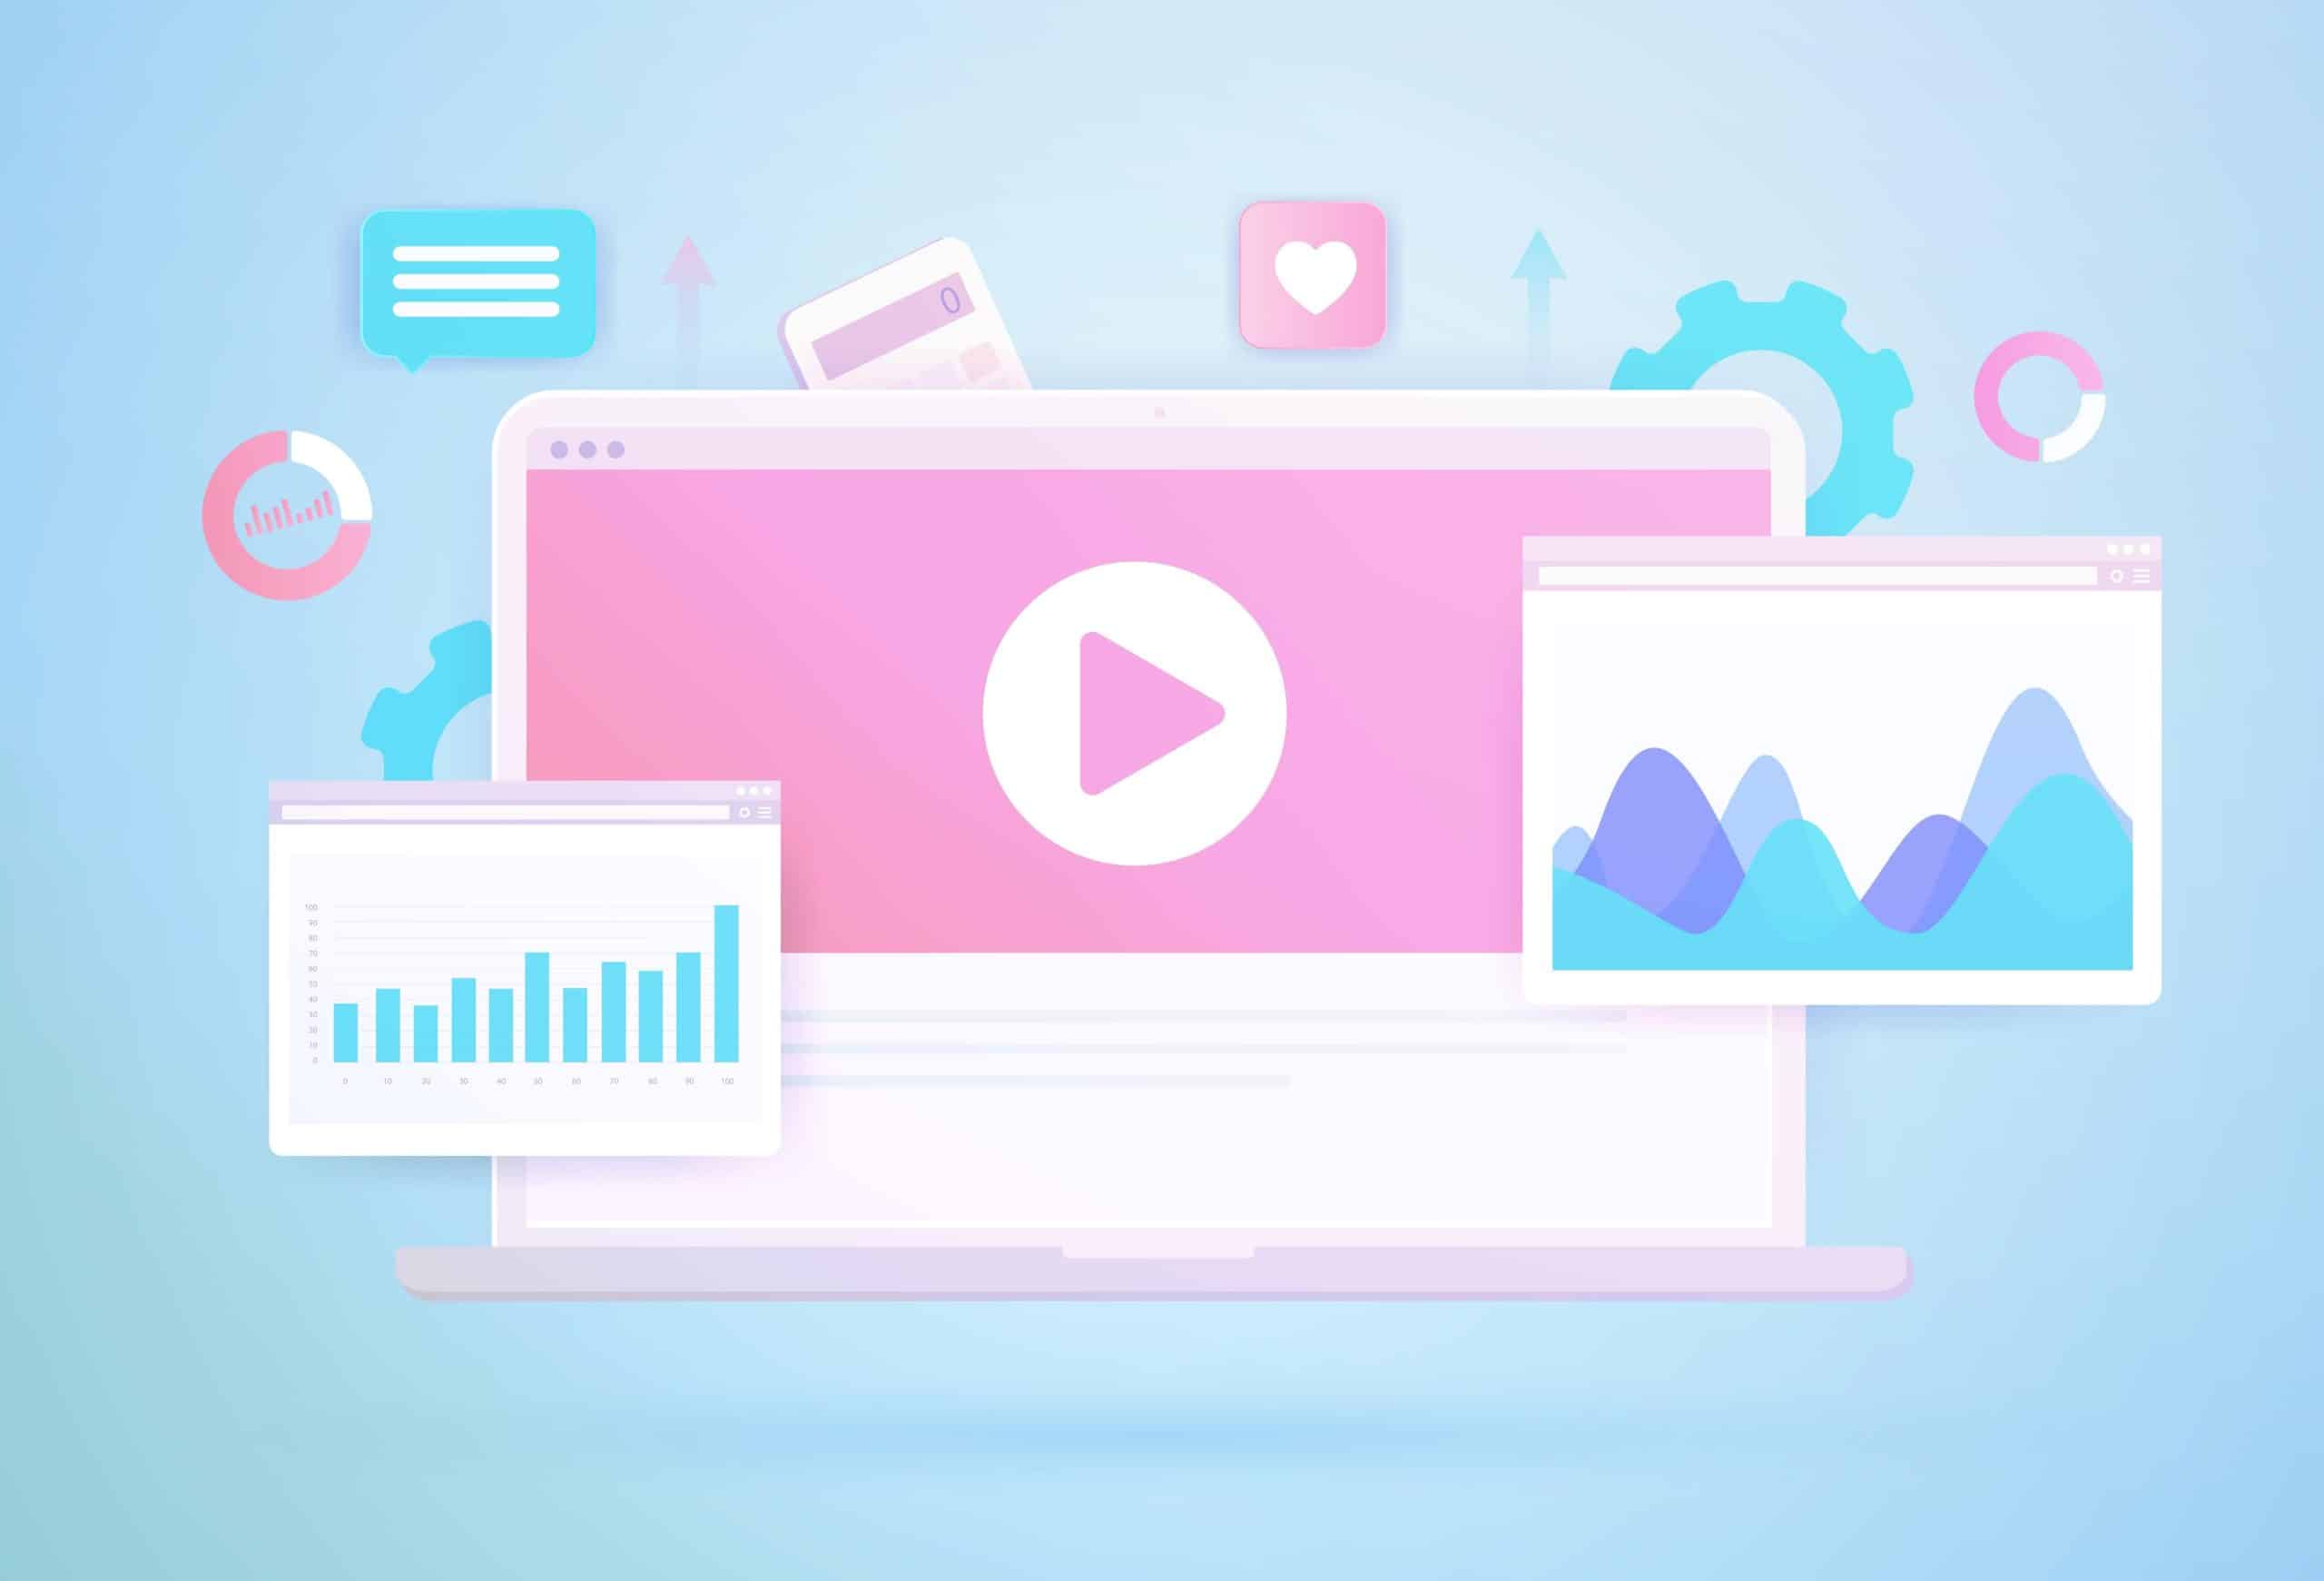 Must-Have Production Tools to Take Your Video Marketing to the Next Level